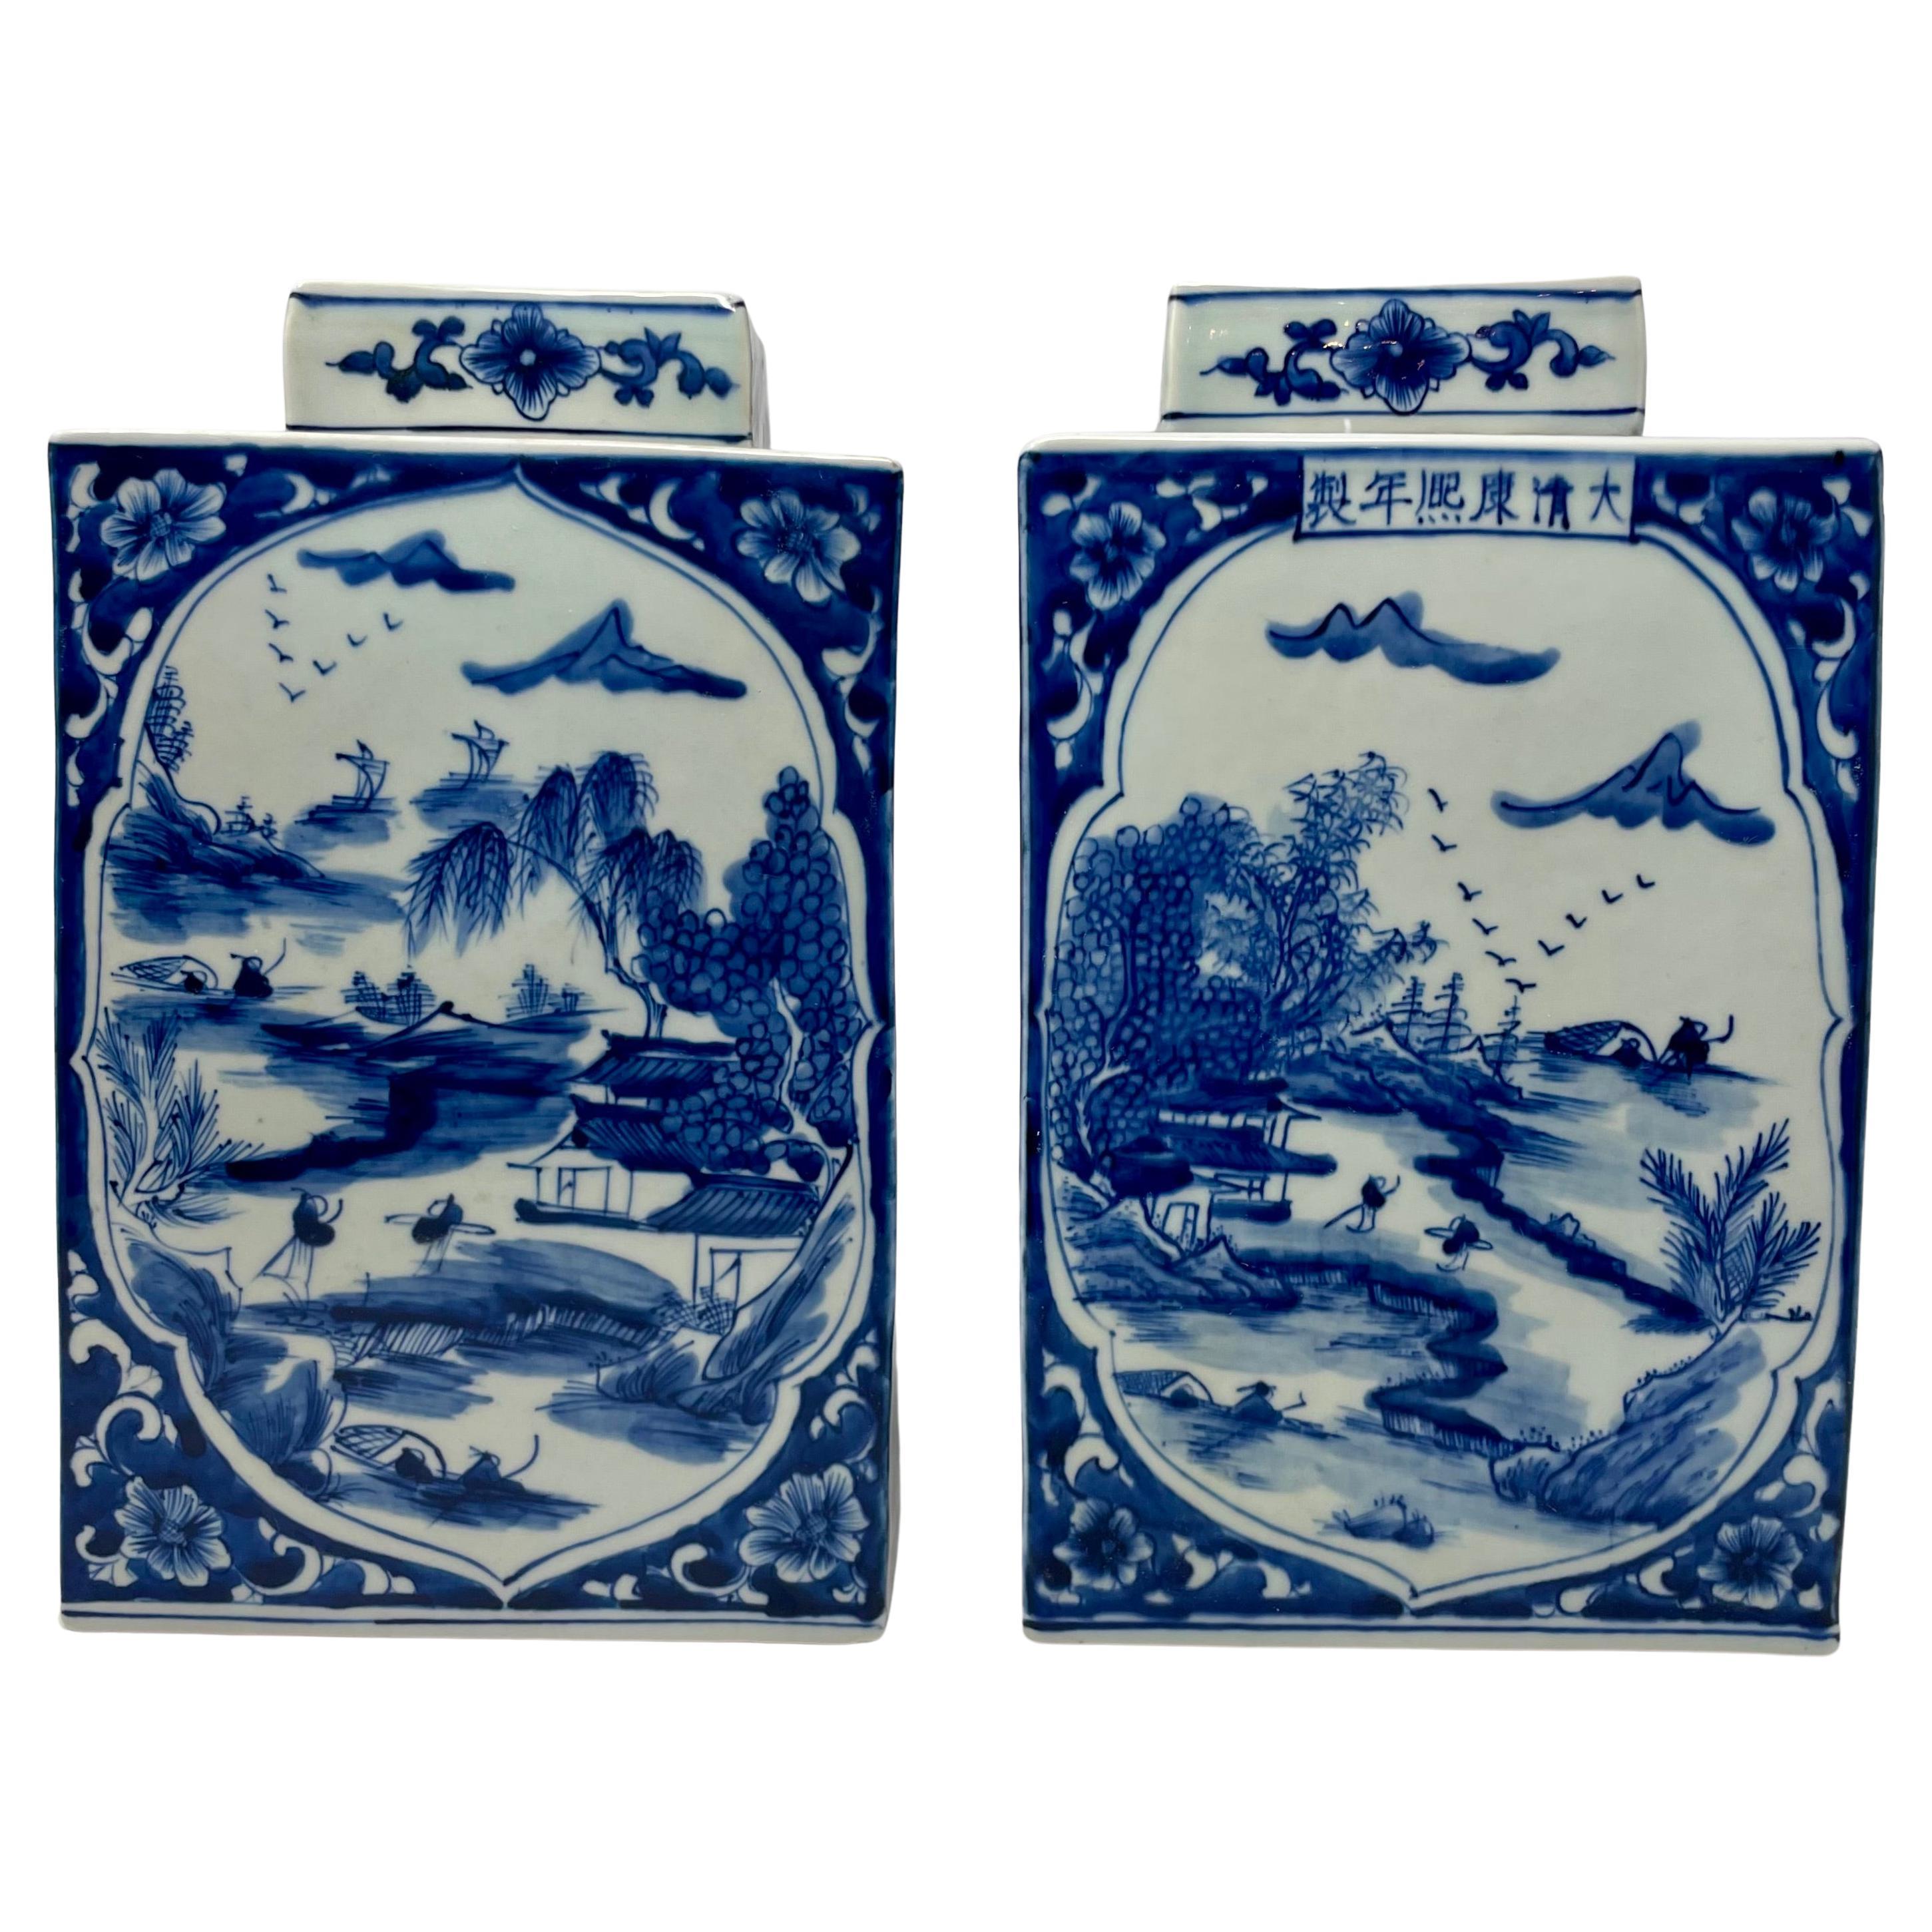 Pair of Estate Chinese Blue and White Porcelain Tea Jars, Circa 1950's